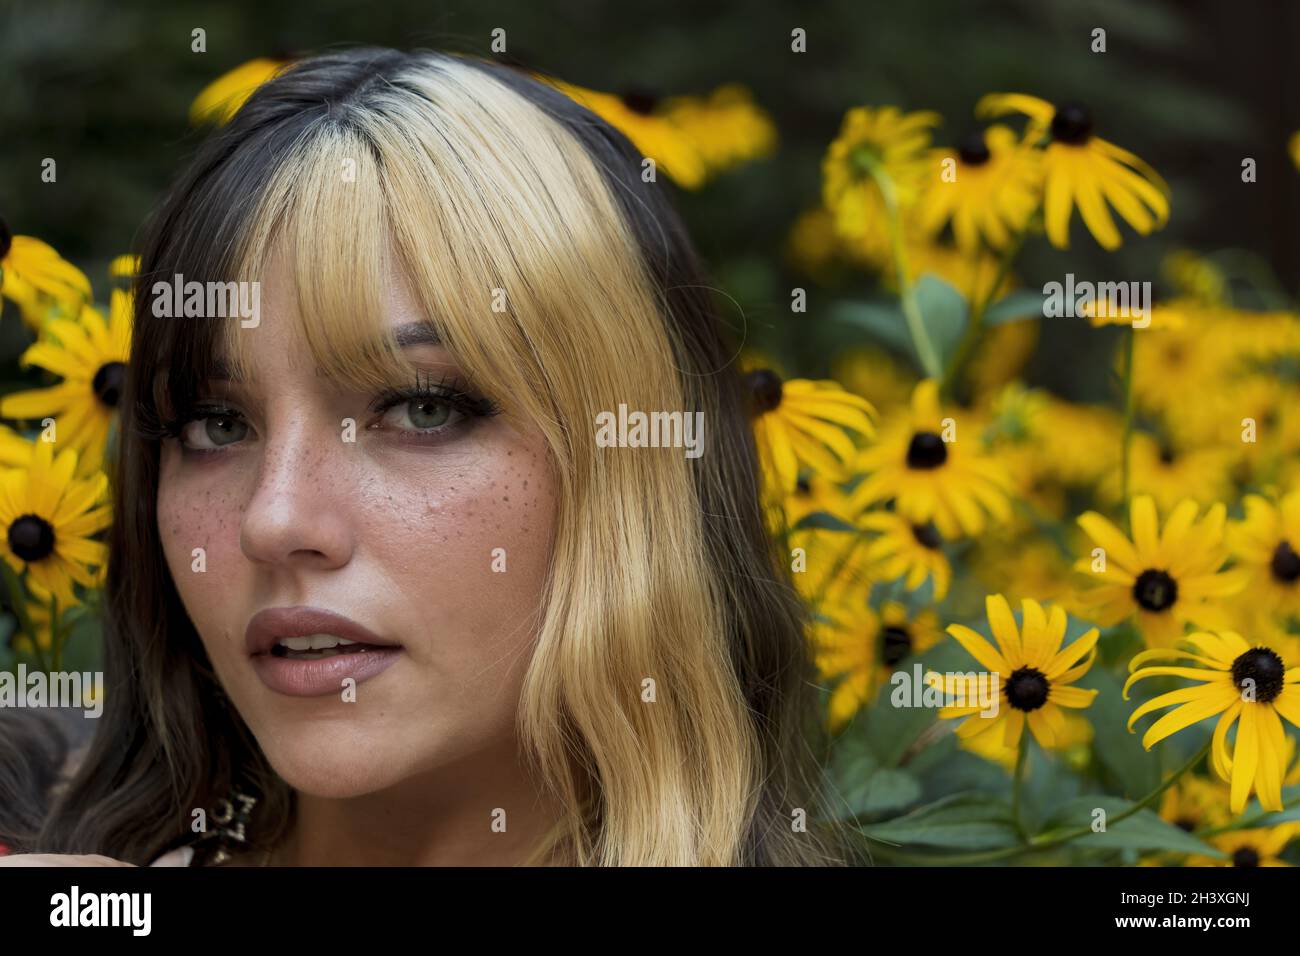 A Lovely Brunette Model Poses In A Field Of Yellow Flowers While Enjoying The Summer Weather Stock Photo